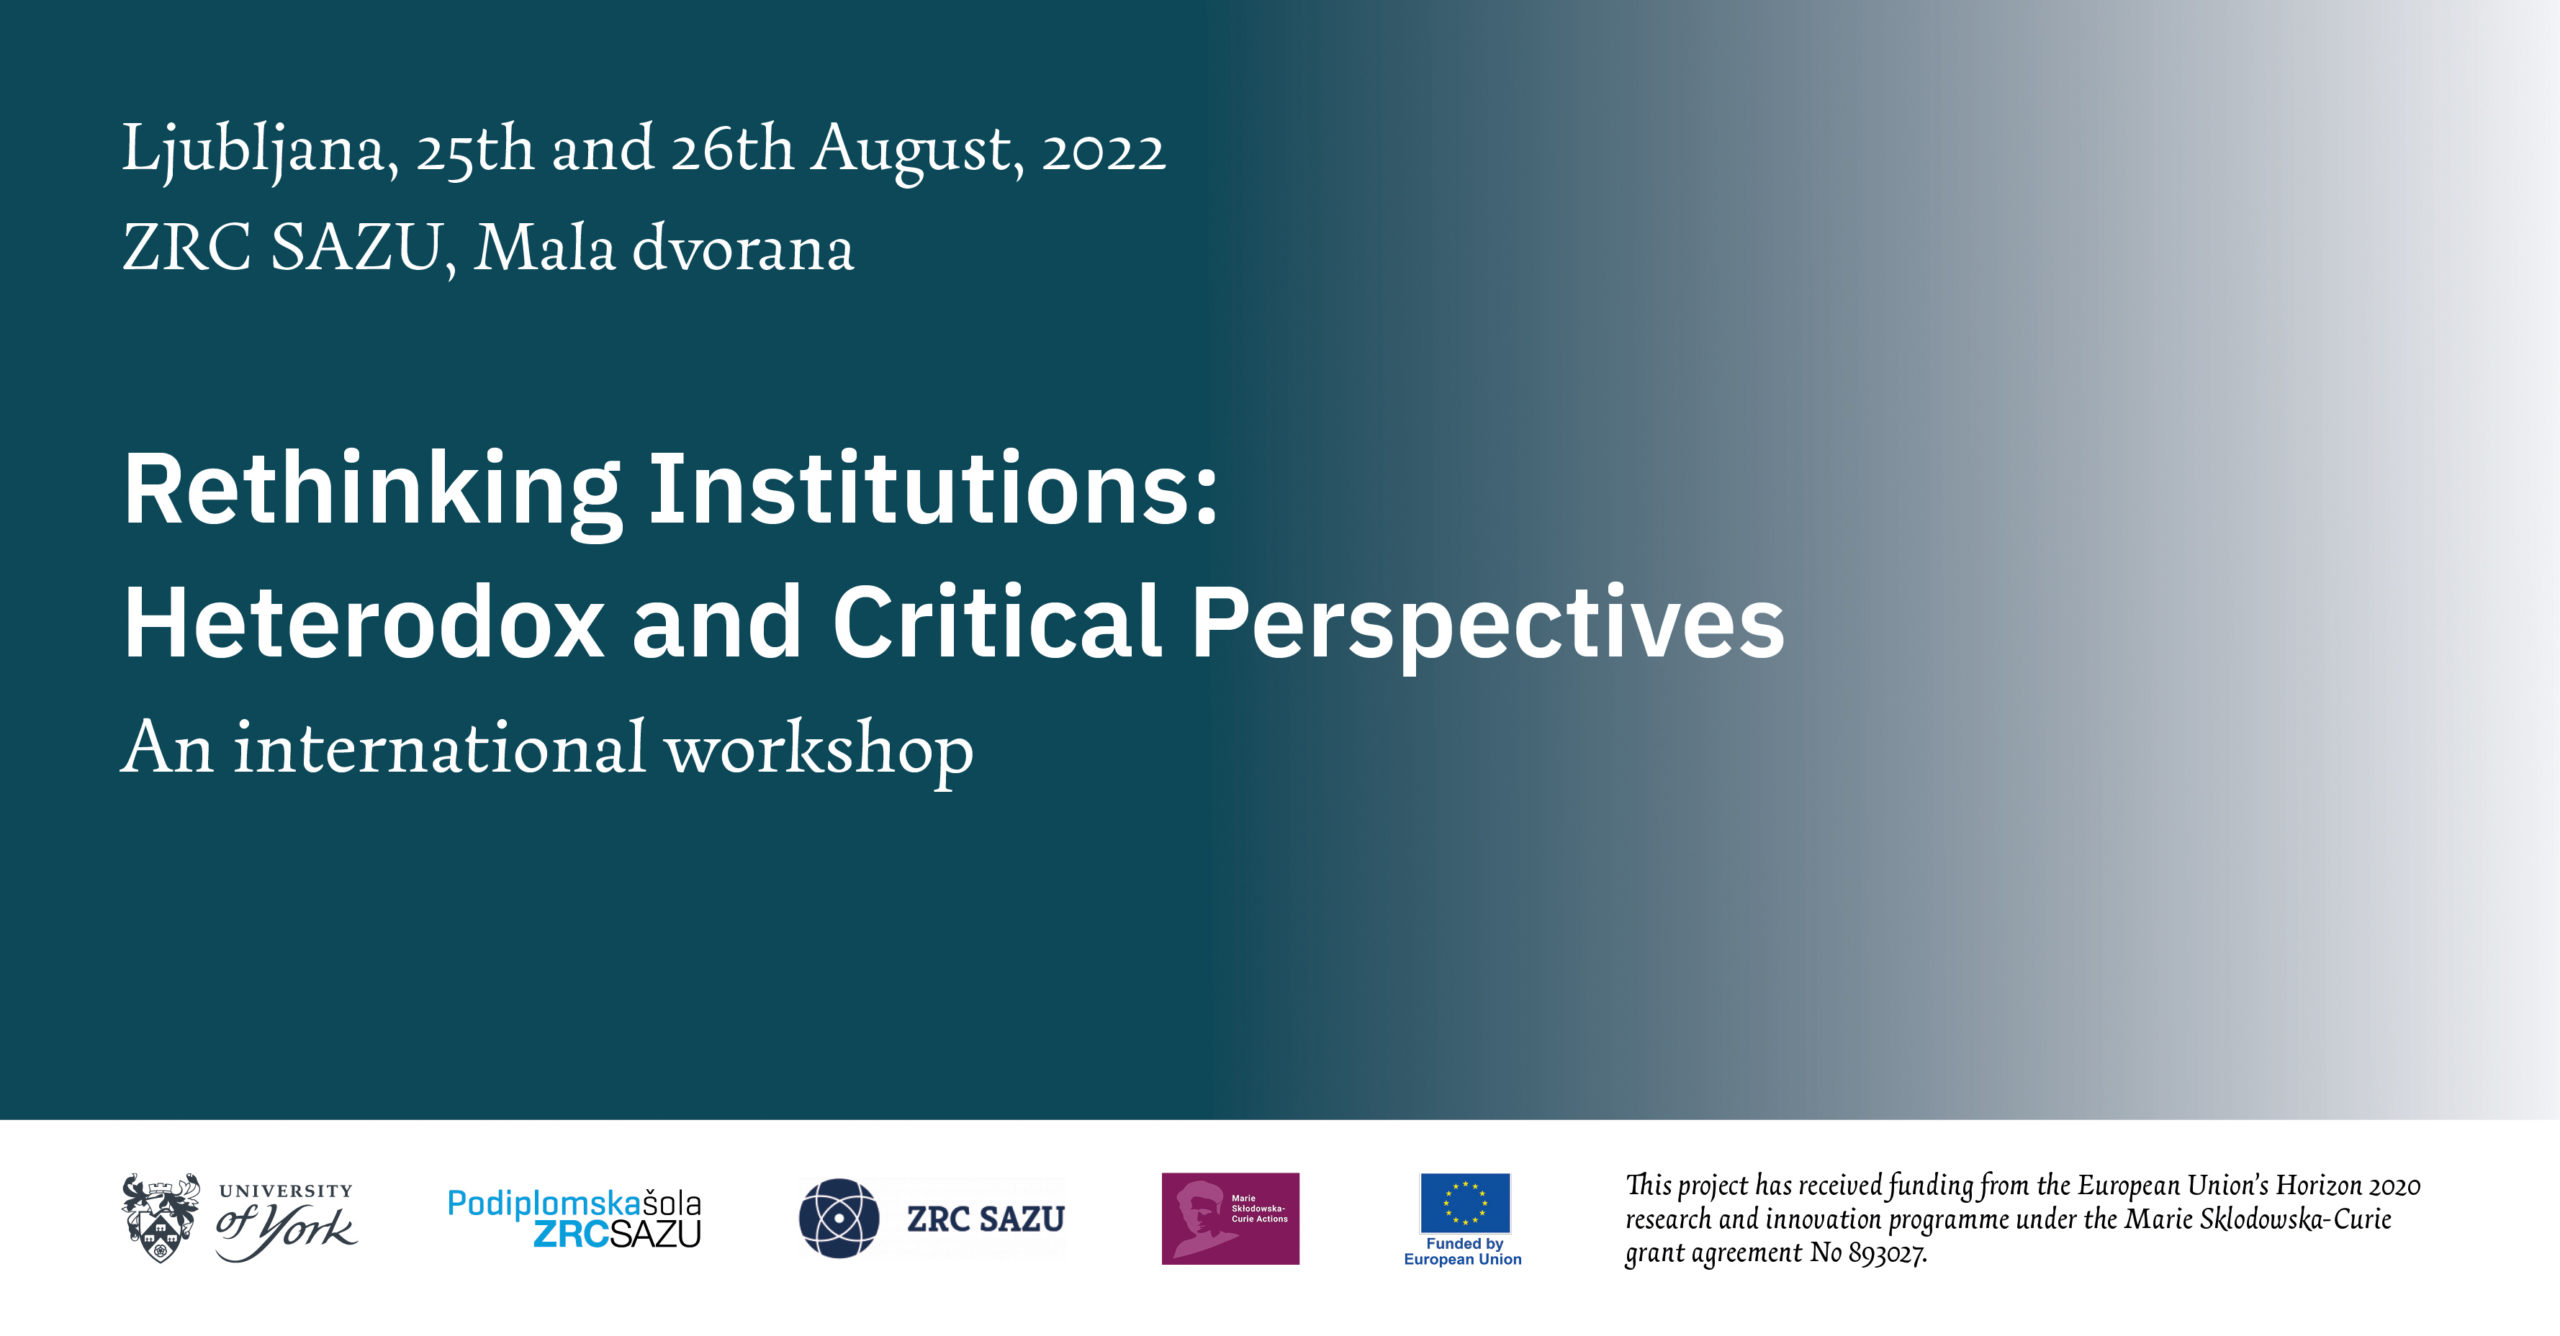 International workshop: Rethinking Institutions: Heterodox and Critical Perspectives